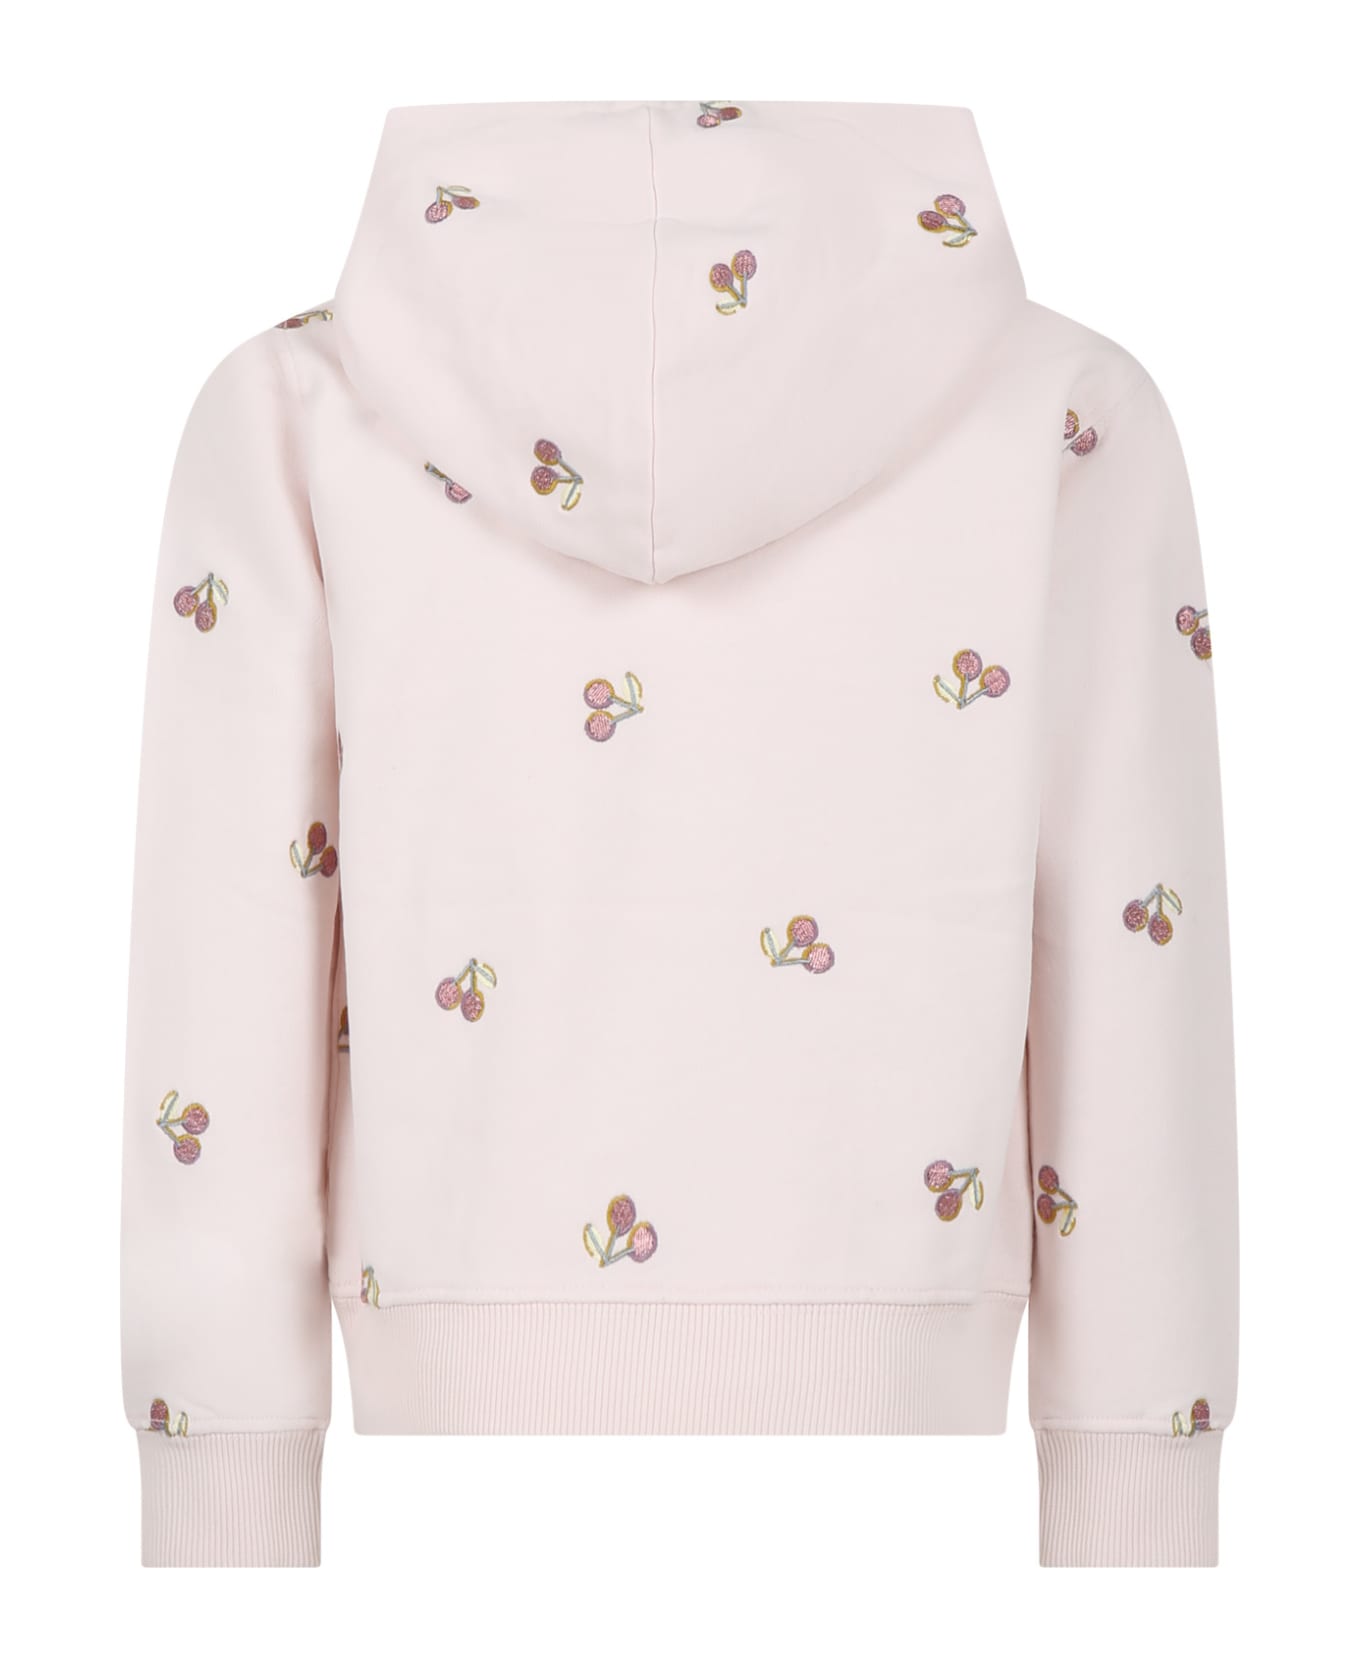 Bonpoint Pink Sweatshirt For Girl With All-over Cherries - Pink